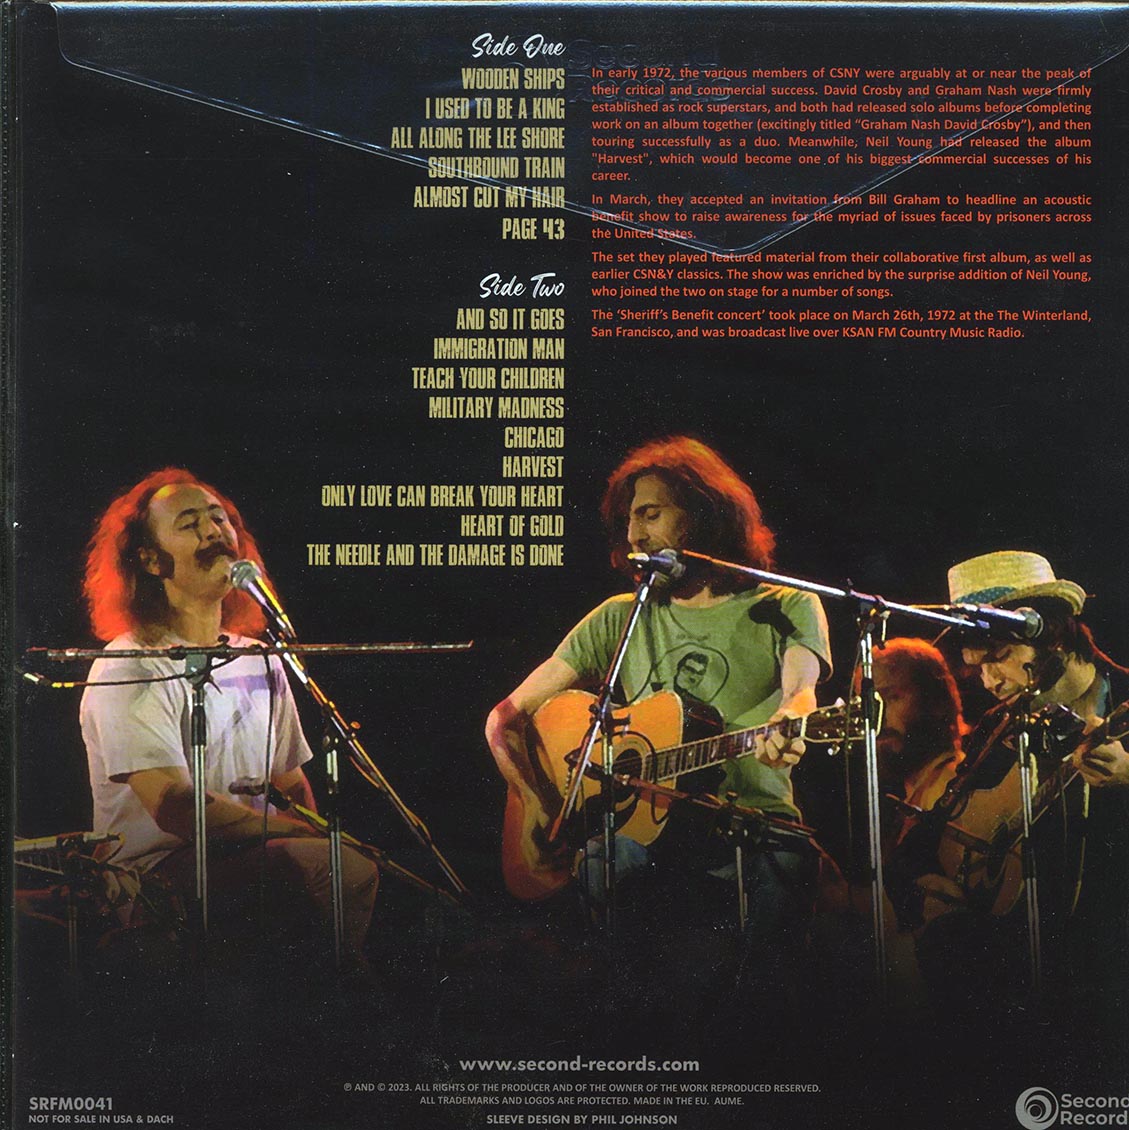 Crosby, Nash & Young - The Gang Of Three: The Winterland San Francisco 26th March 1972 KSAN FM Country Music Radio Broadcast (180g) (clear vinyl) - Vinyl LP, LP